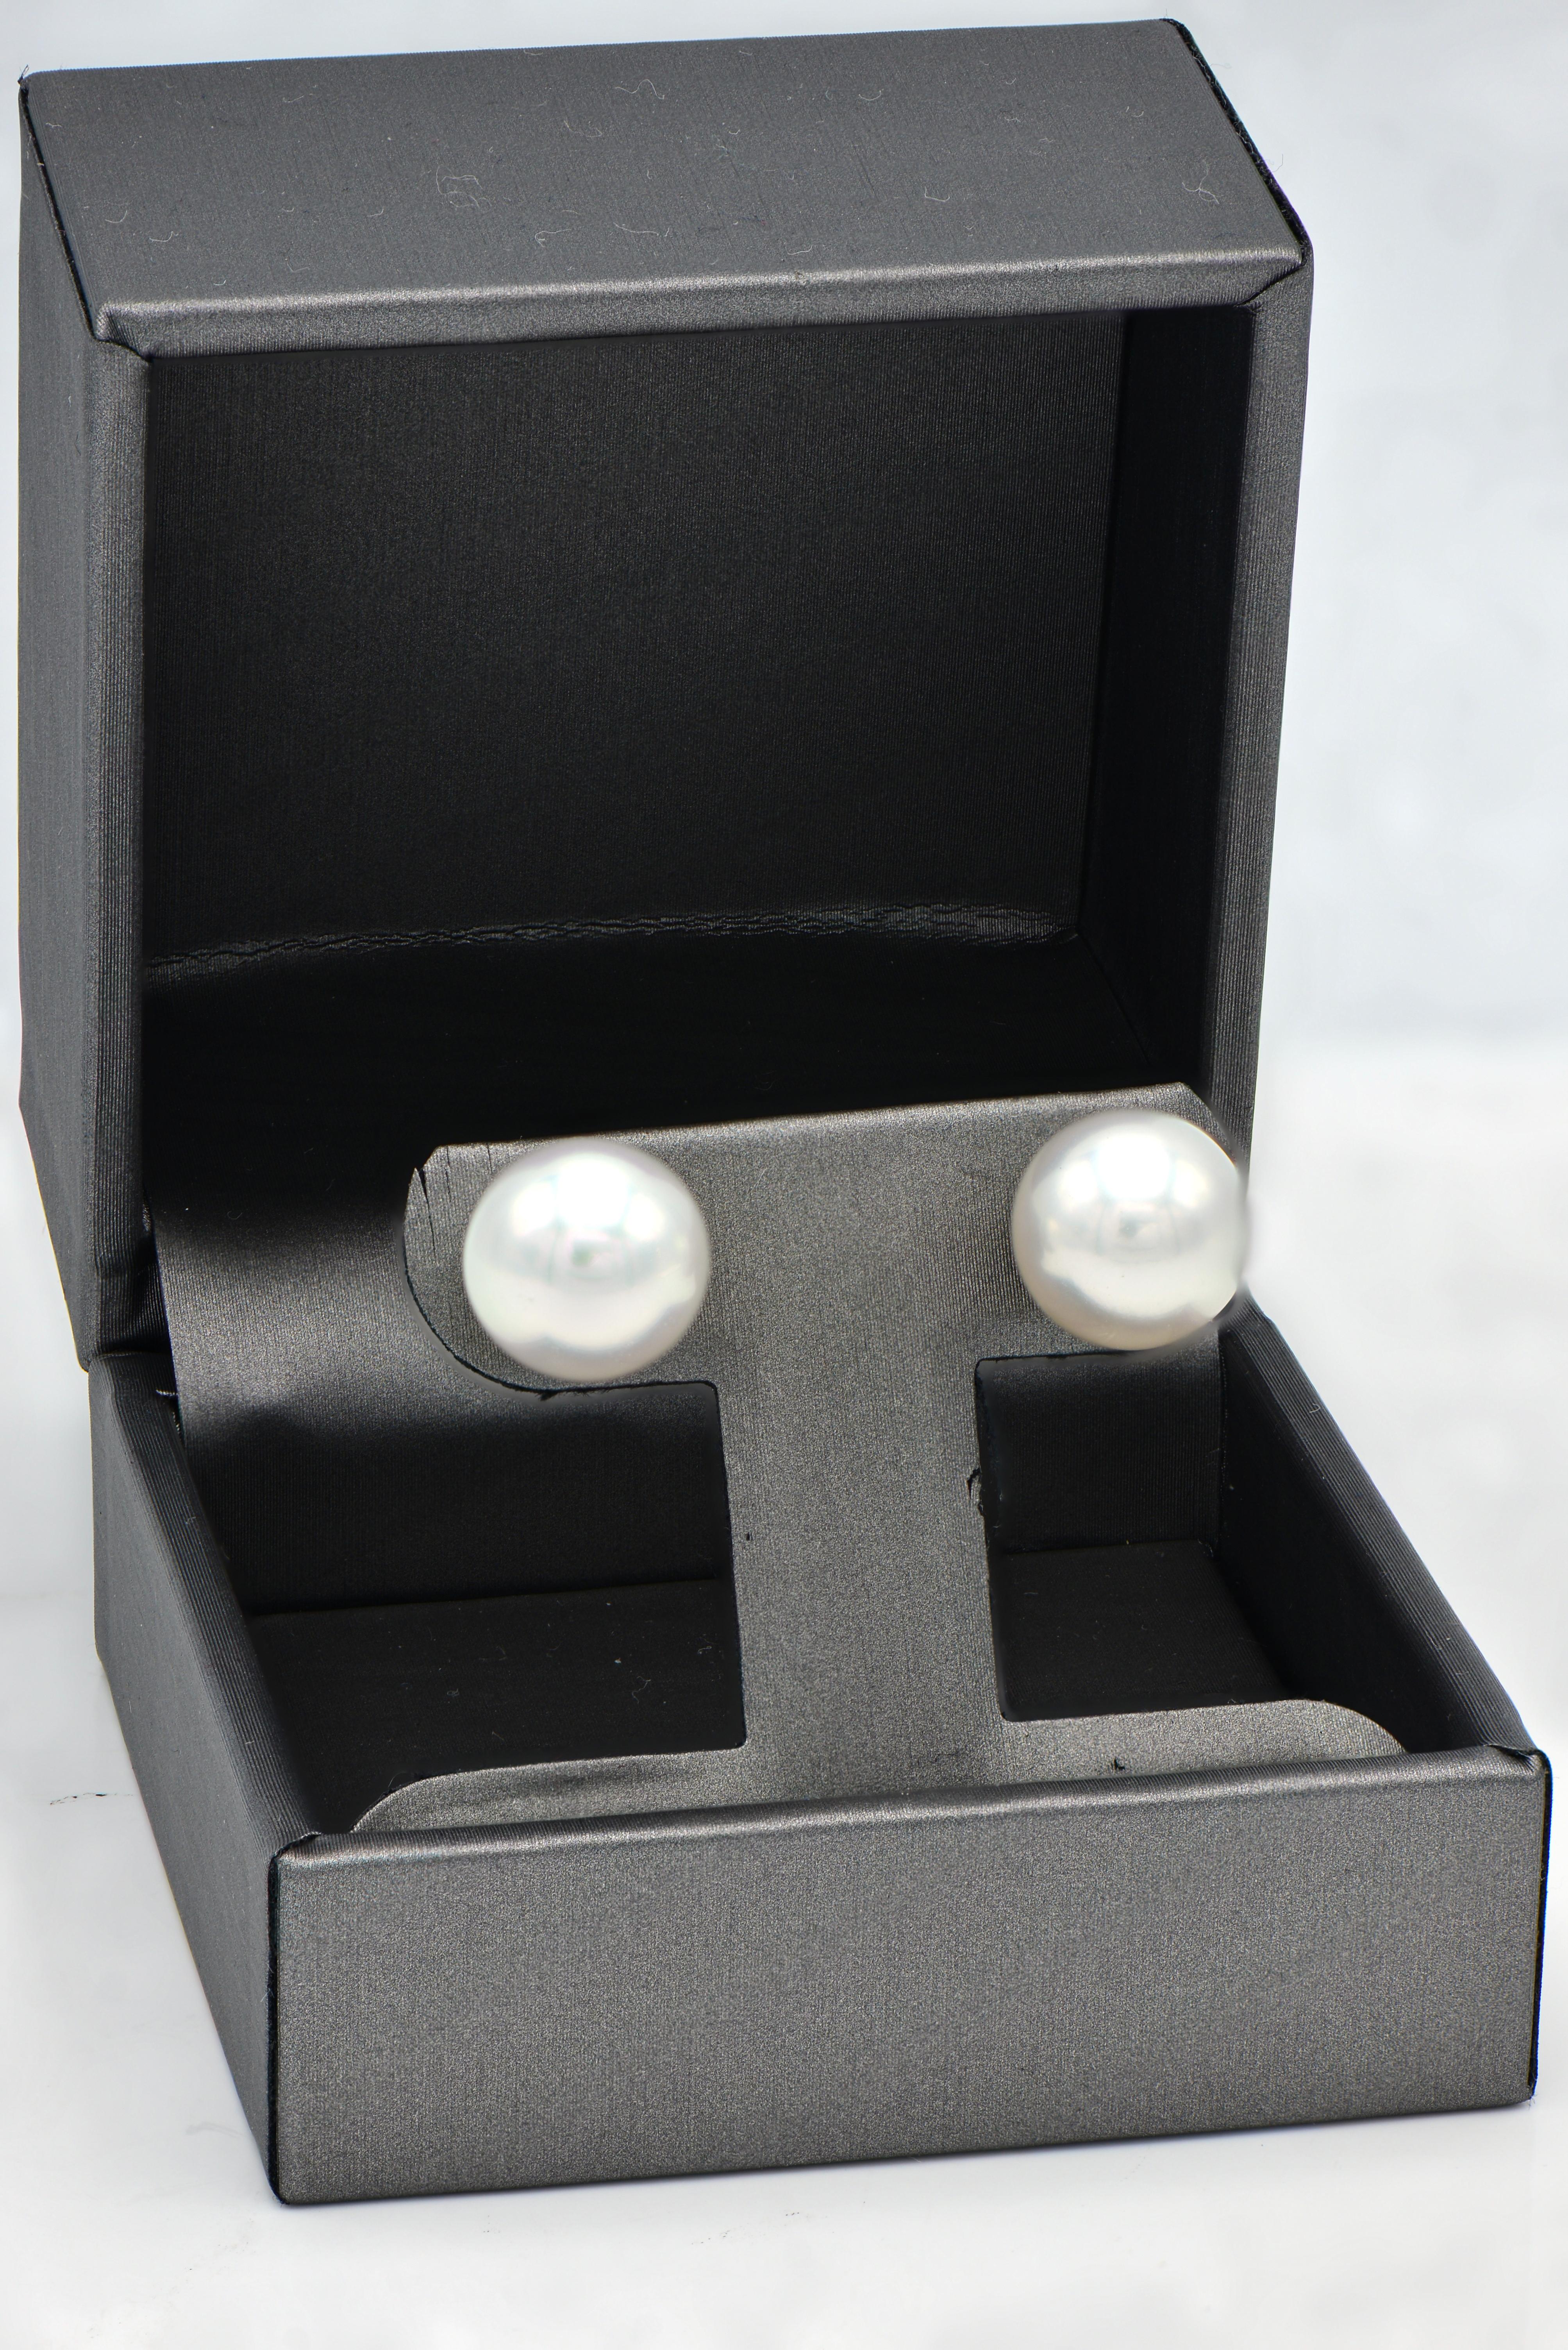 South Sea Pearl Stud Earrings are a classic and timeless piece of jewelry that should be owned by everyone. South Sea studs are slightly larger than cultured pearl studs for a bigger more sophisticated look. These 11-11.5mm South Sea Pearl Studs are